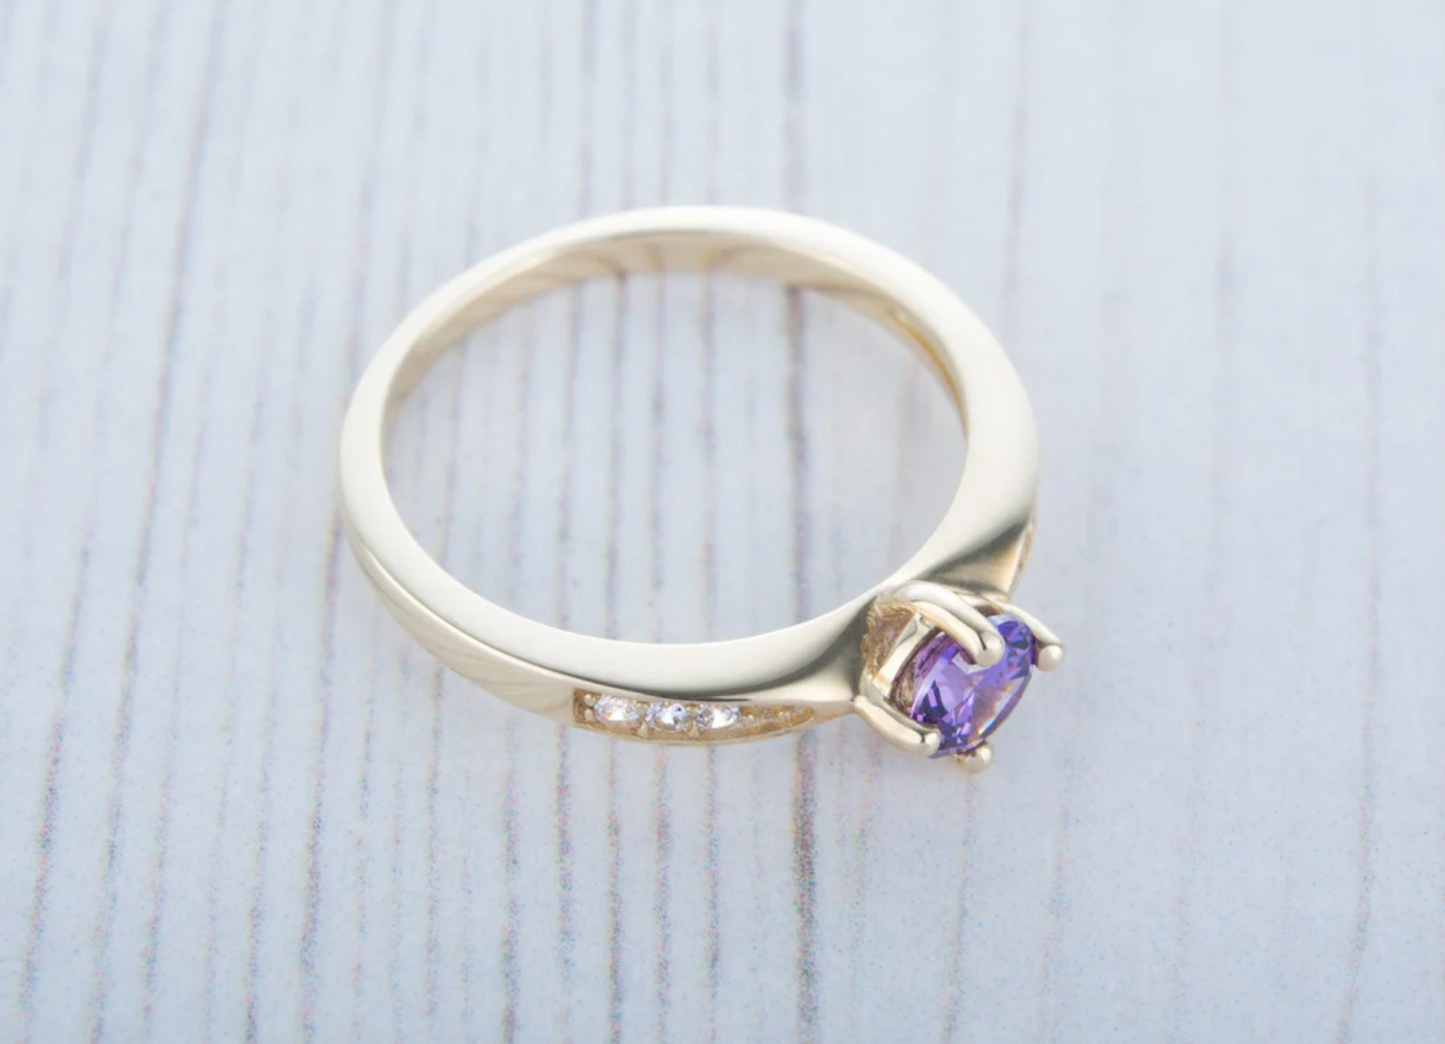 Size UK O / US 7 10K Solid Yellow Gold and Amethyst Engagement ring.